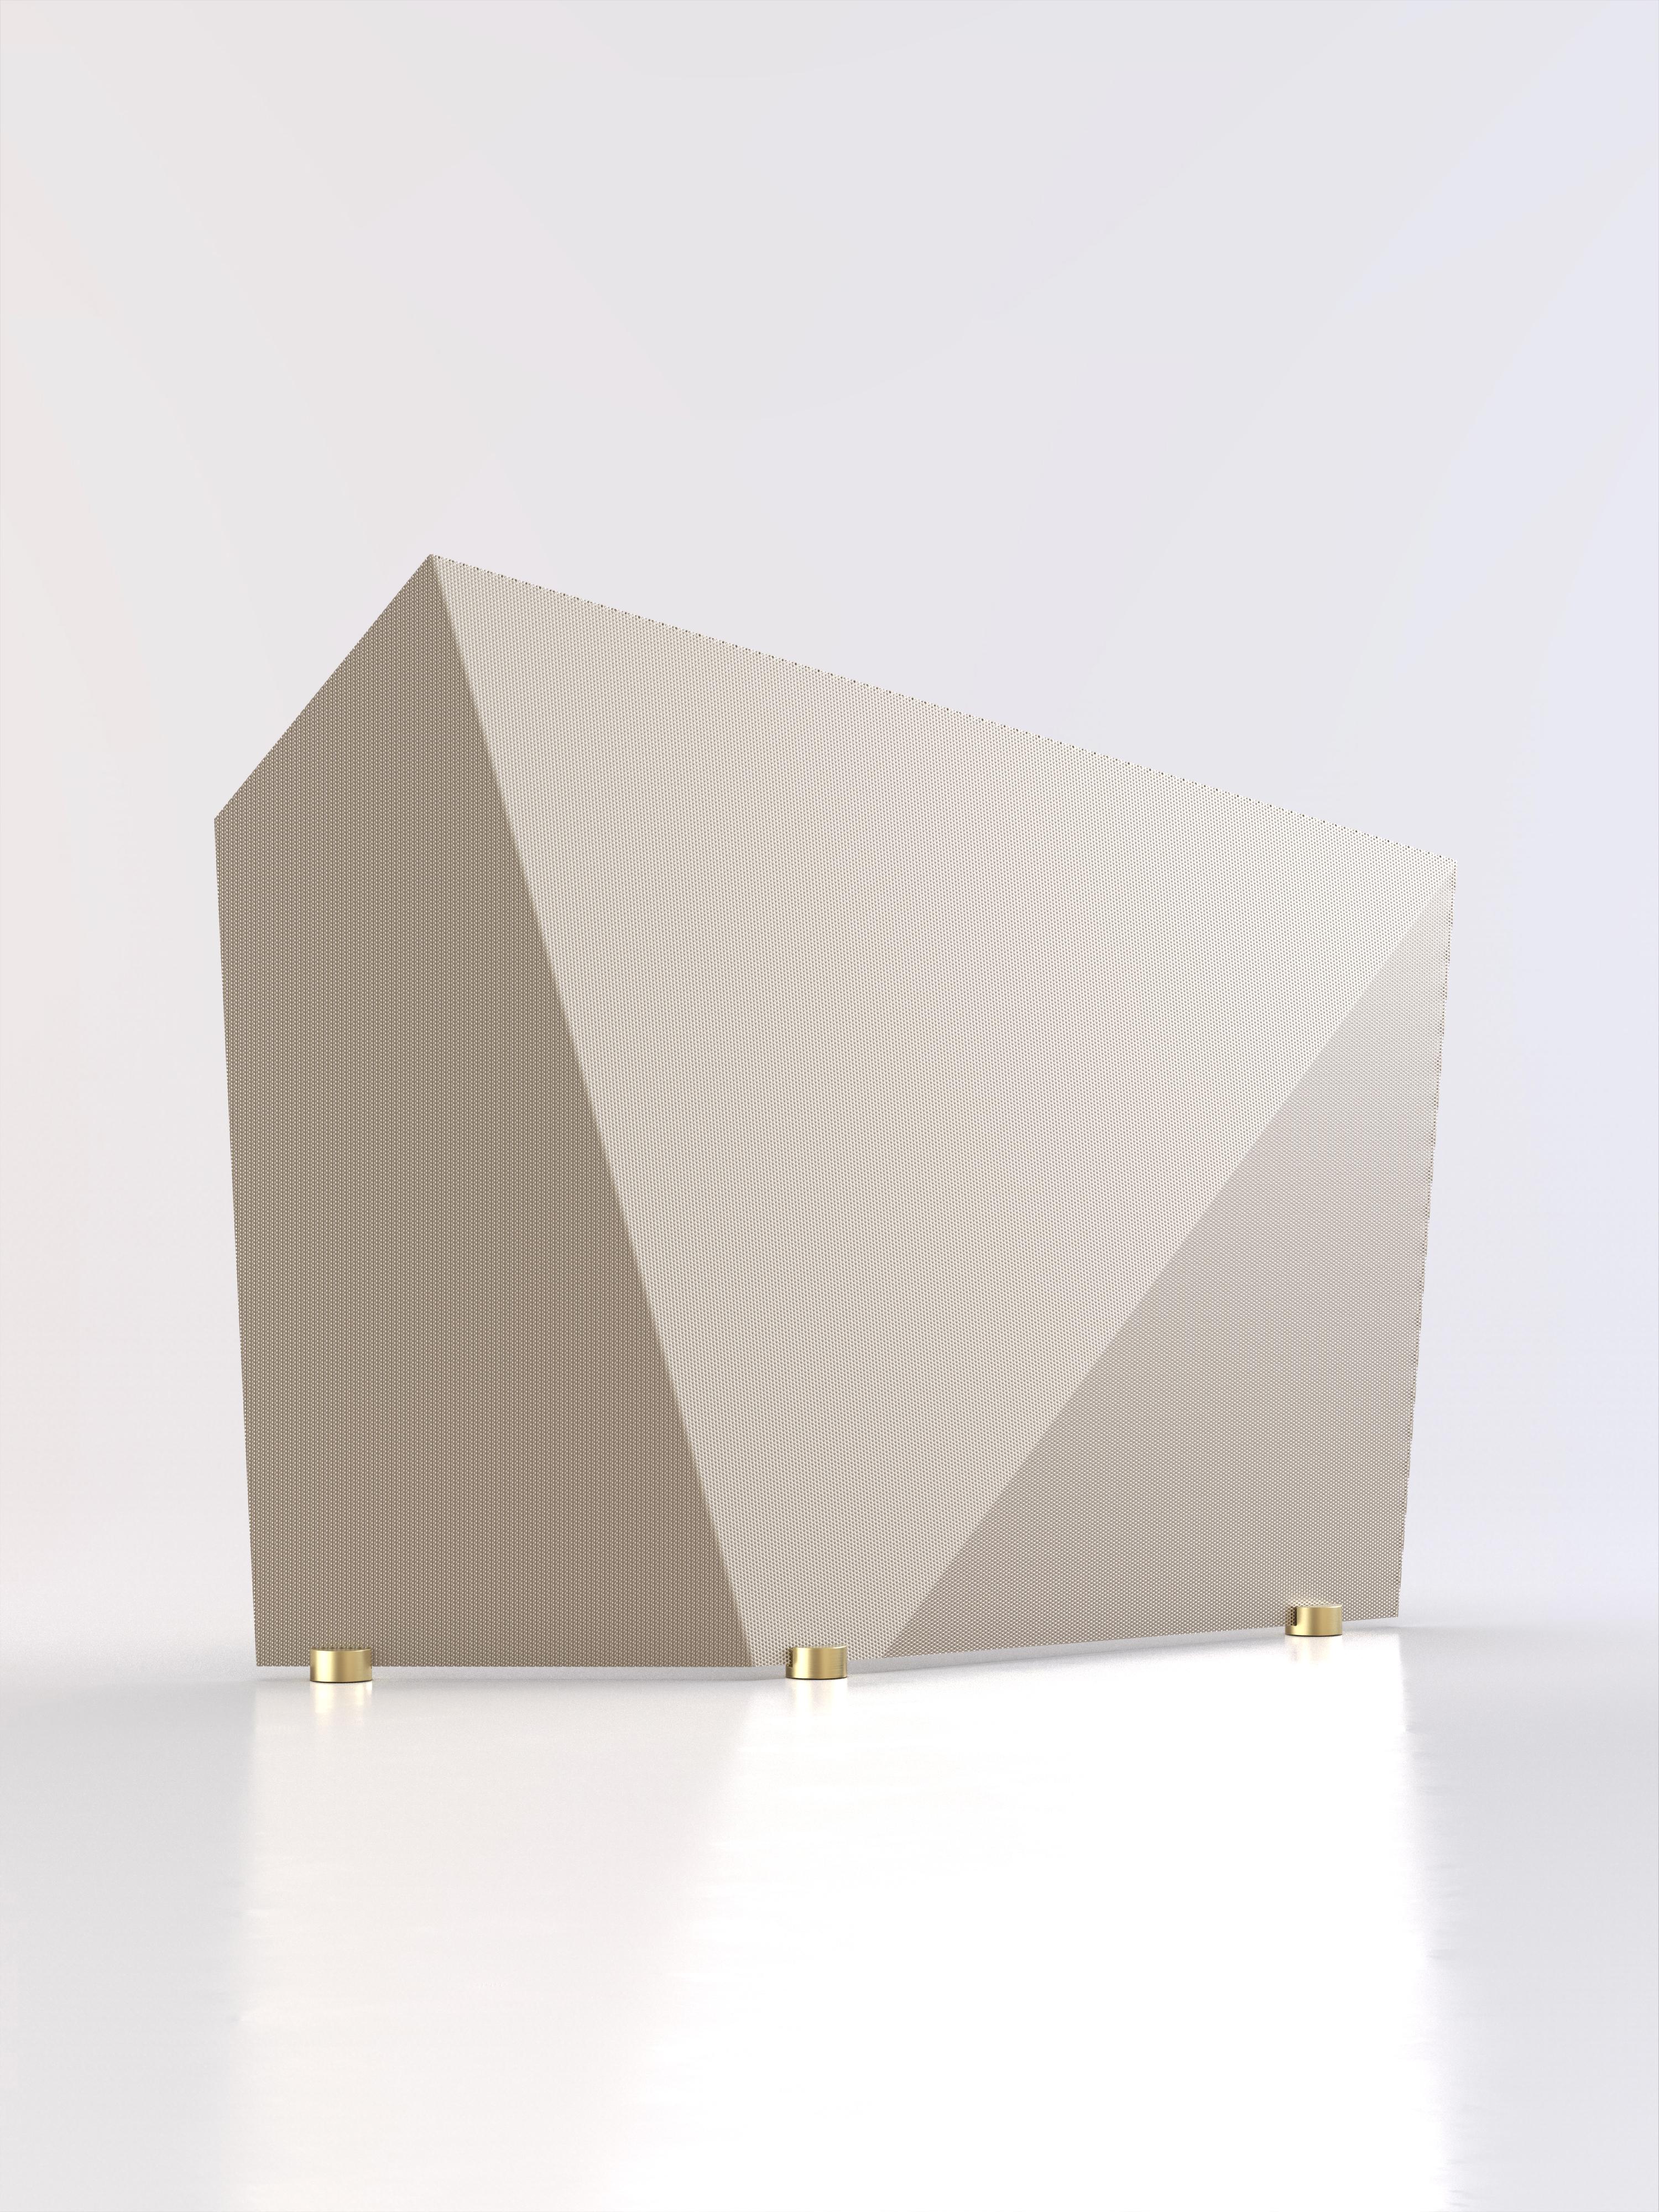 Fireplace shield made of folded and lasercut steel metalsheet; feet made in carved brushed brass.